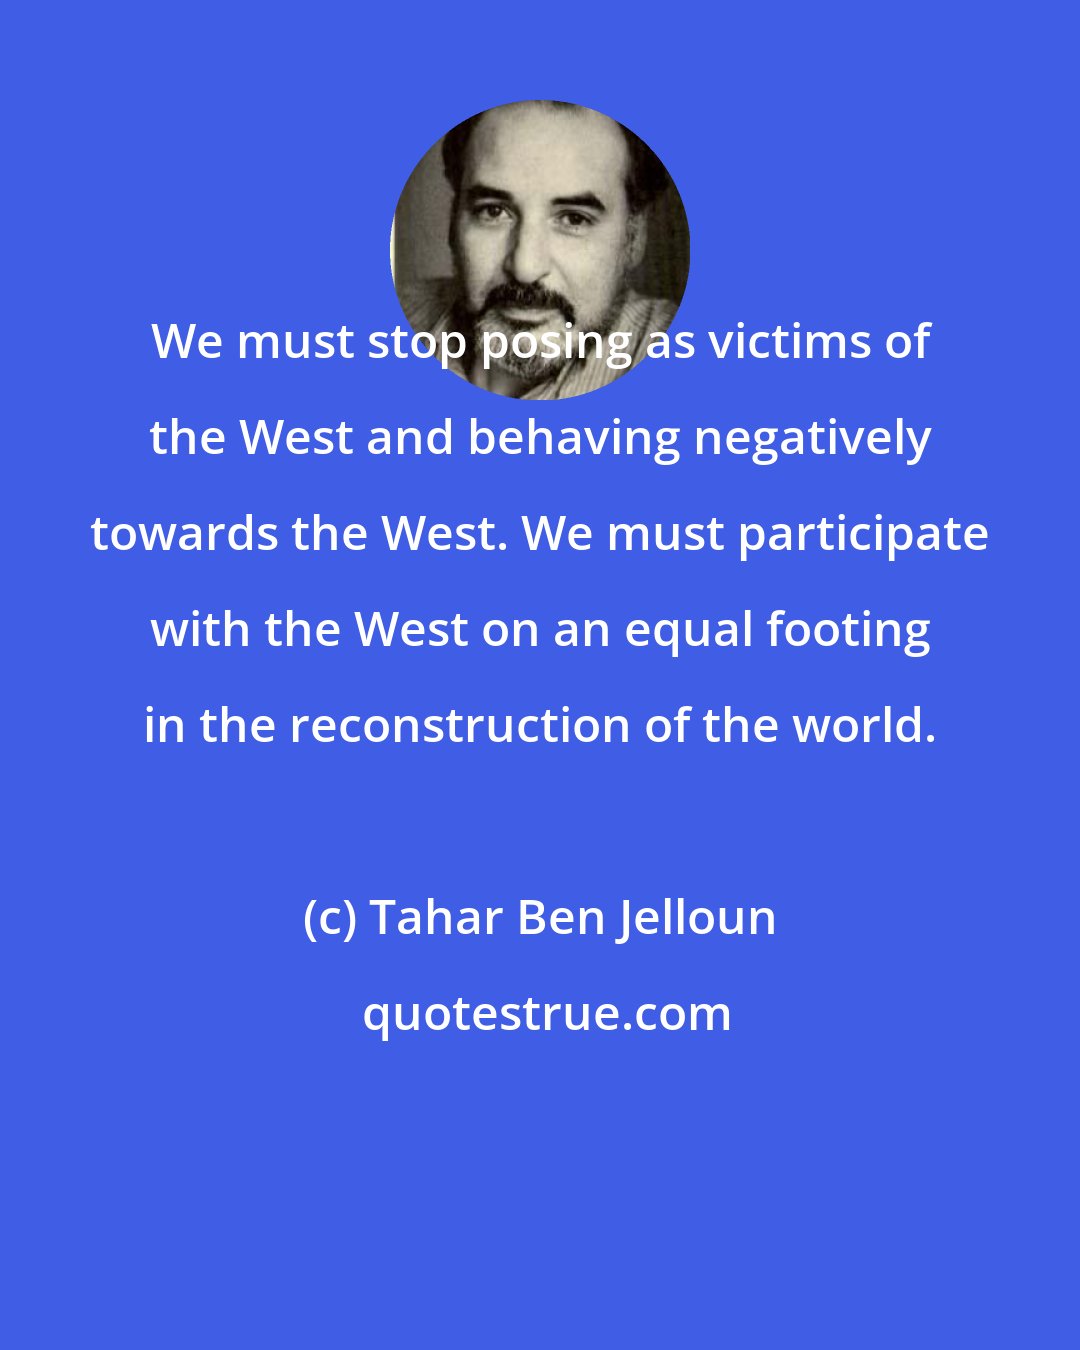 Tahar Ben Jelloun: We must stop posing as victims of the West and behaving negatively towards the West. We must participate with the West on an equal footing in the reconstruction of the world.